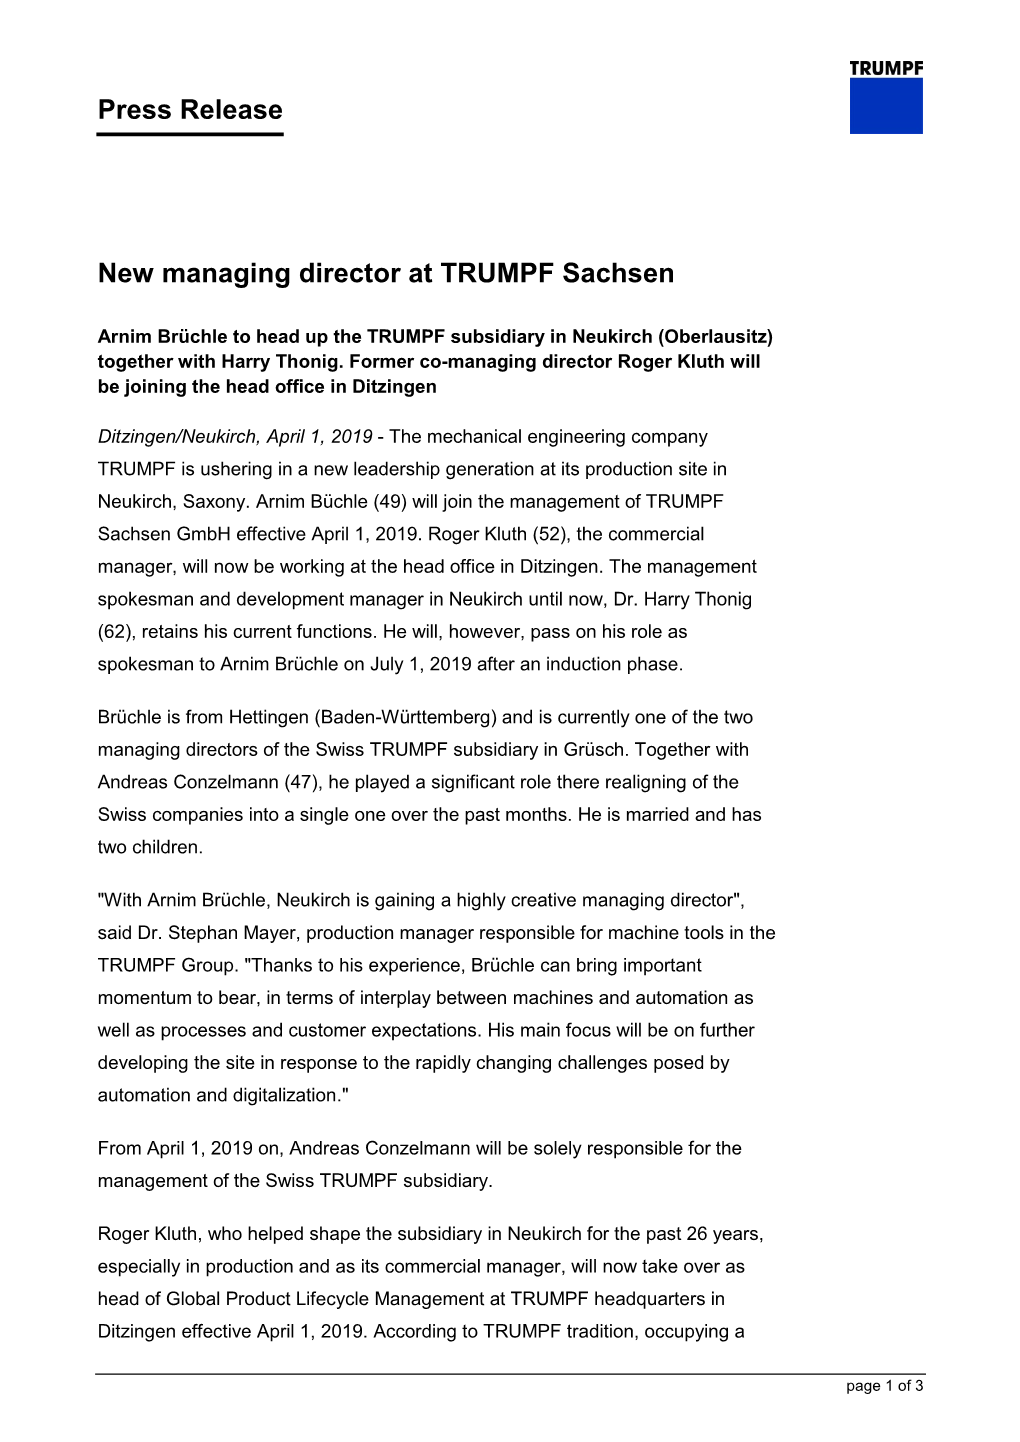 Press Release New Managing Director at TRUMPF Sachsen